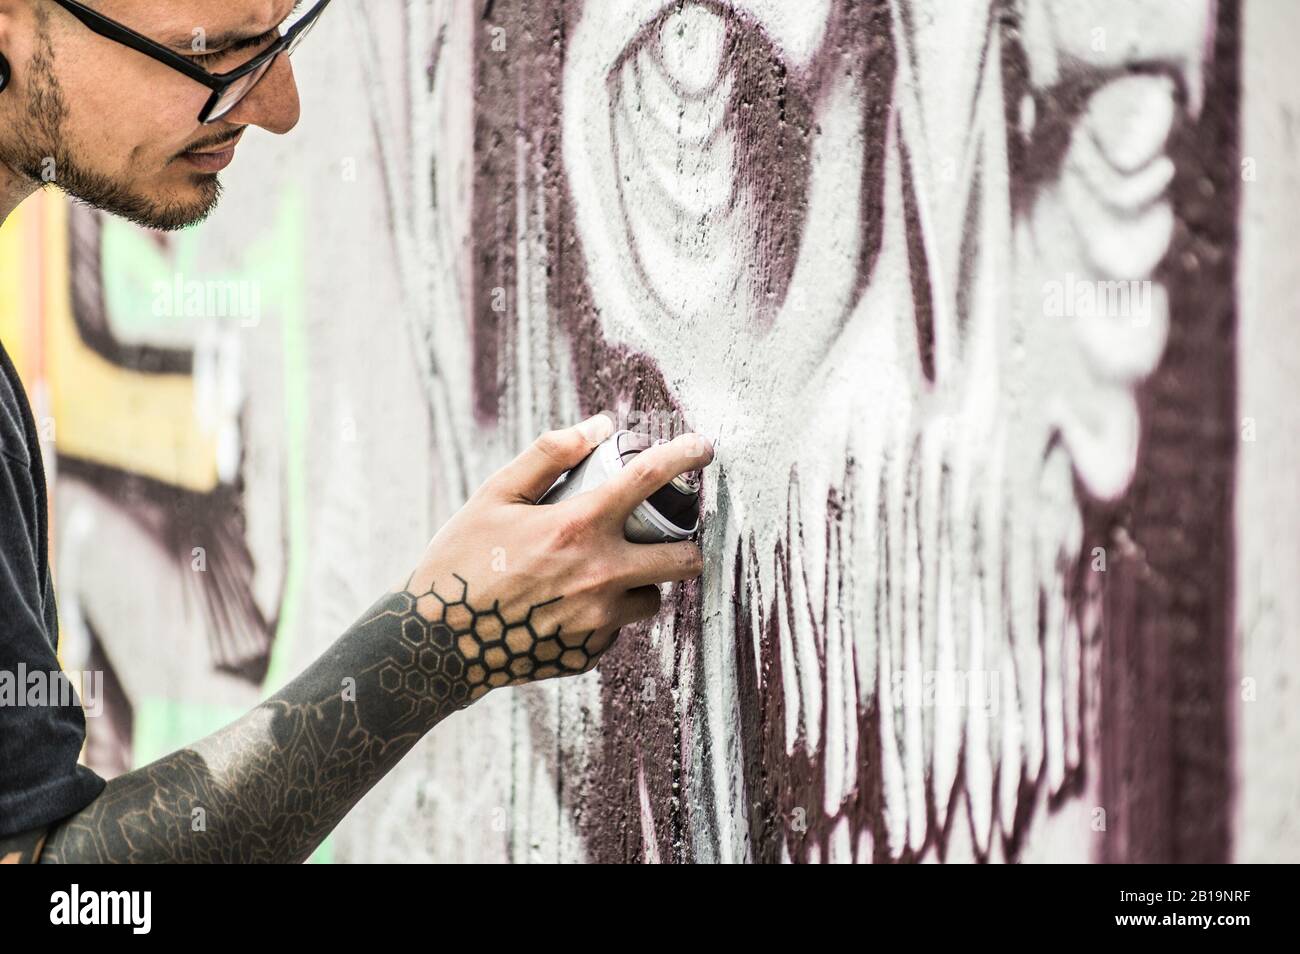 Tattoo graffiti writer painting with color spray his dark picture on the wall - Contemporary artist at work - Urban lifestyle,street art concept - Foc Stock Photo